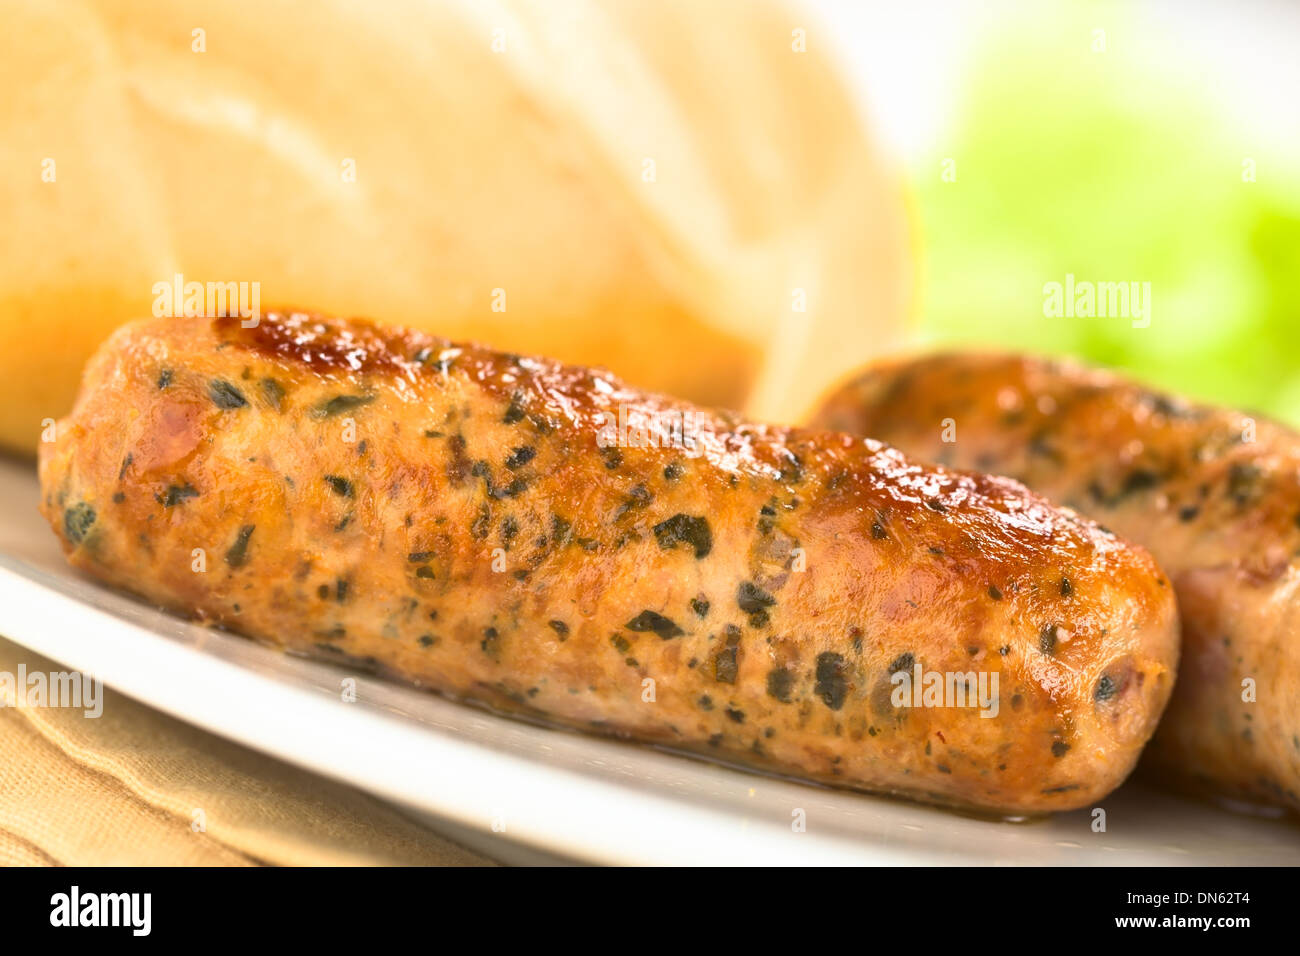 Fried bratwurst with bun, traditional German fast food served on plate Stock Photo